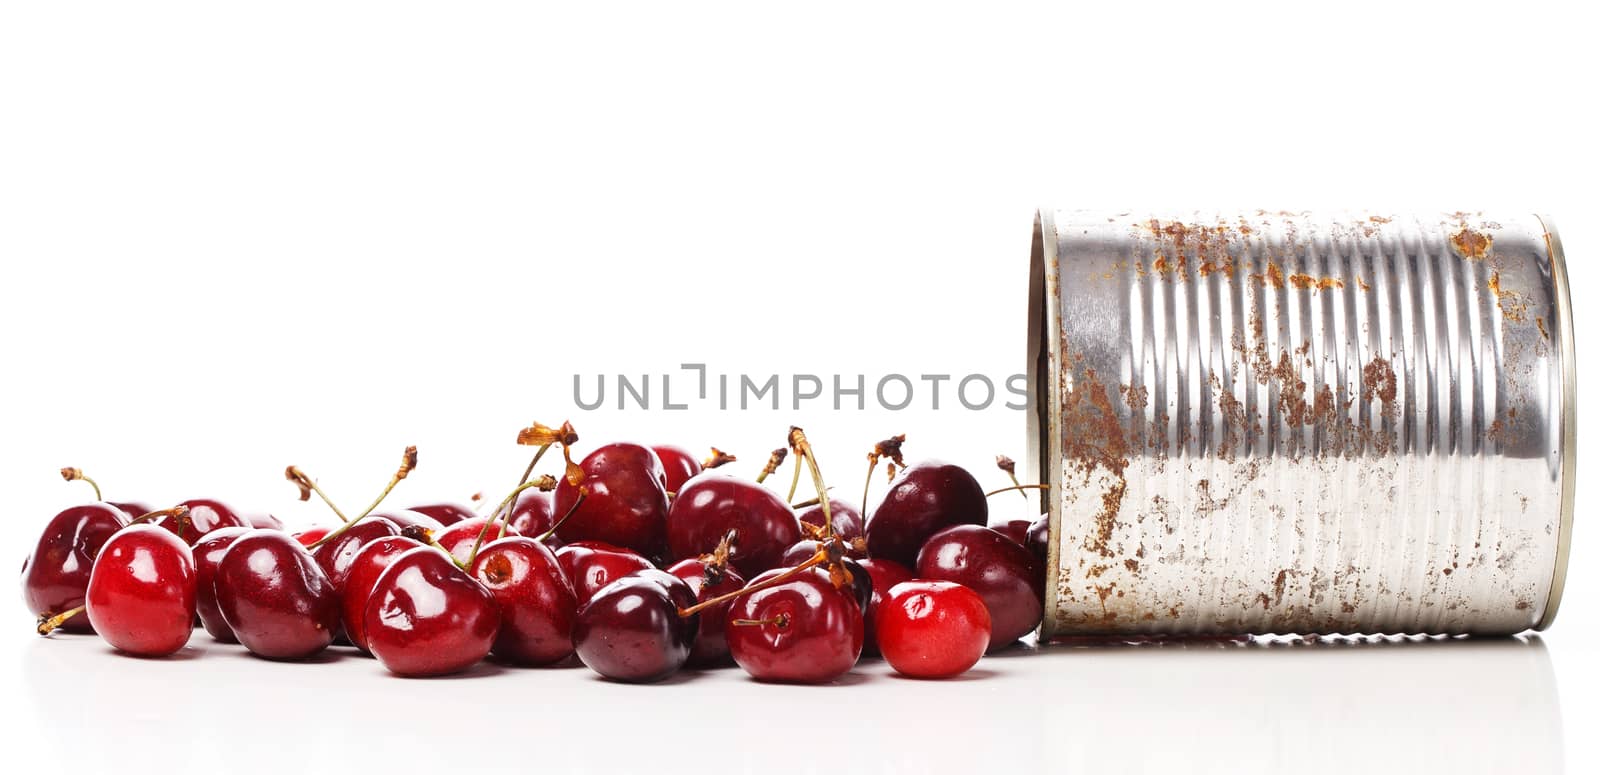 Food, berries. Cherry on the table